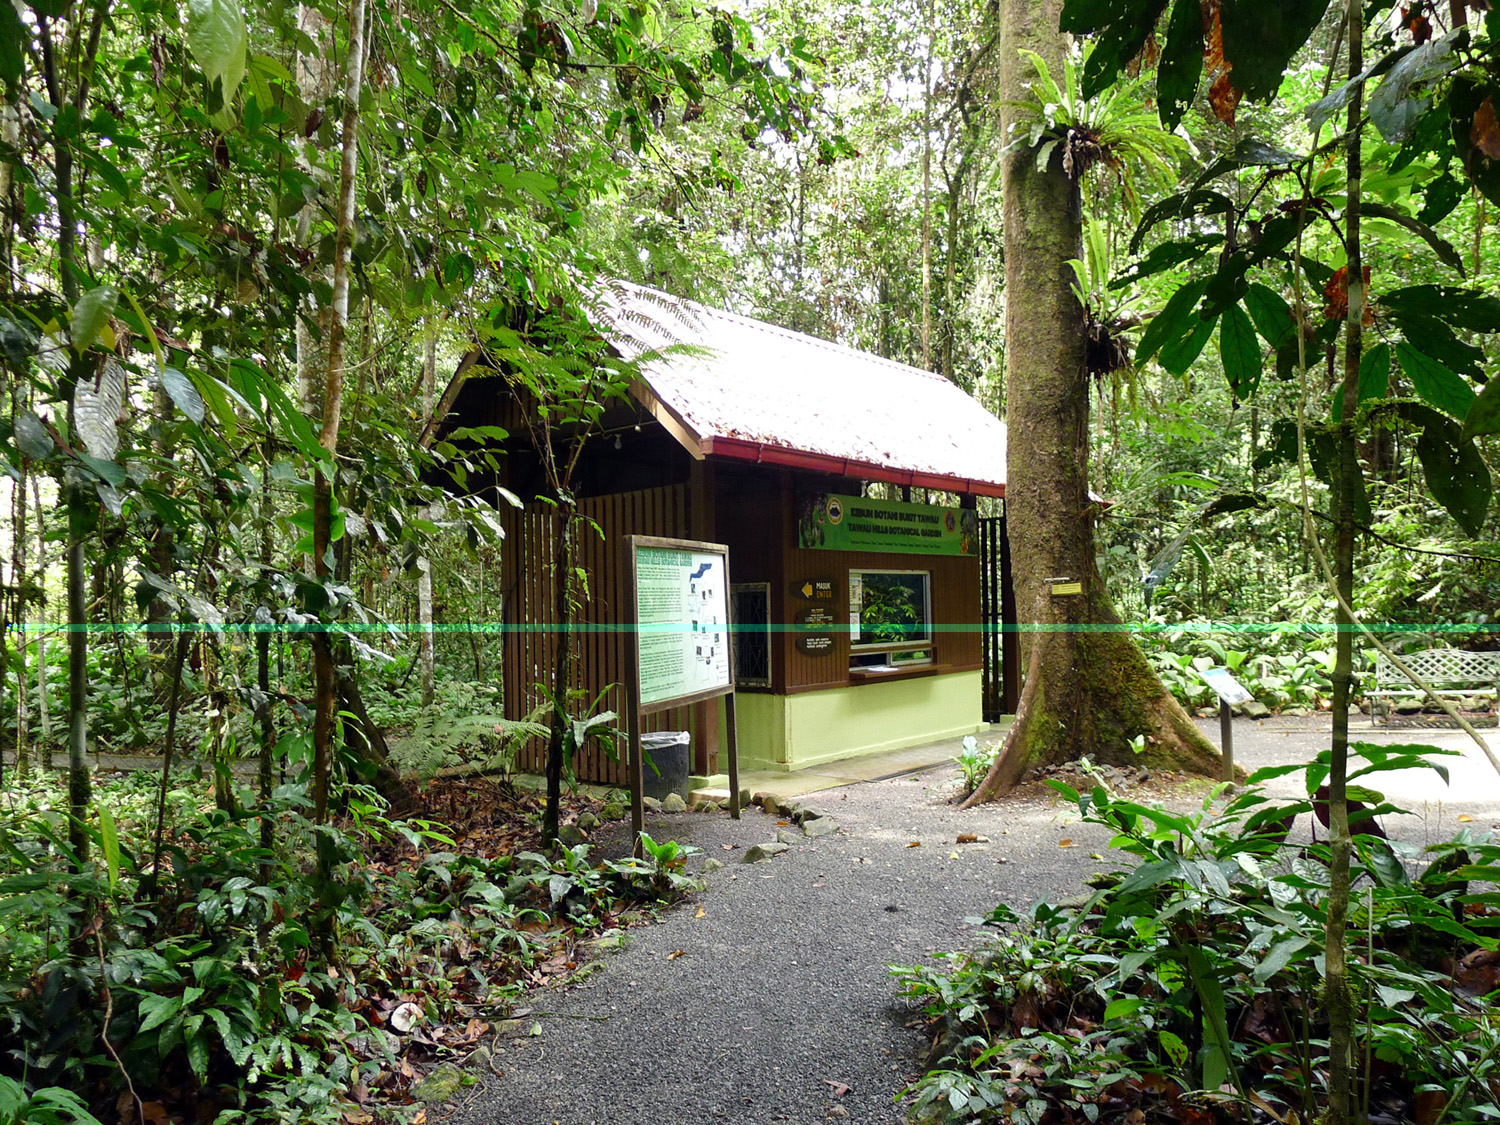 Botanical Garden - Lowland Garden of orchids and herbs (Opened on 25 January 2006)